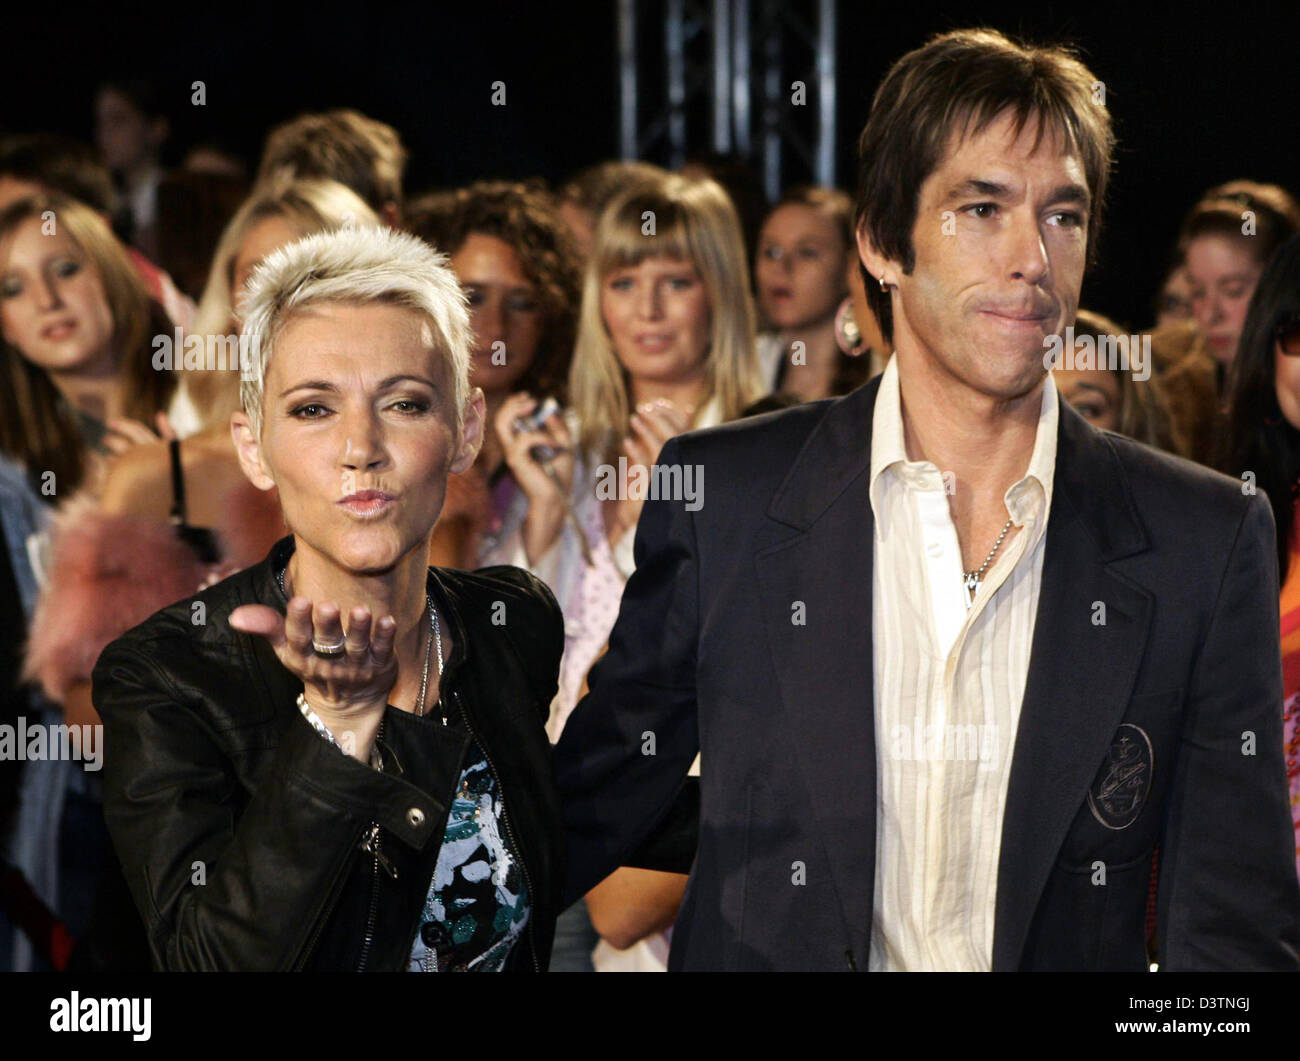 The duo 'Roxette' (Per Gessle (R) and Marie Fredriksson (L)) pose at the  gala on the occasion of the 50 years anniversary of the youth newspaper  'Bravo' in Hamburg, Germany, Saturday, 21